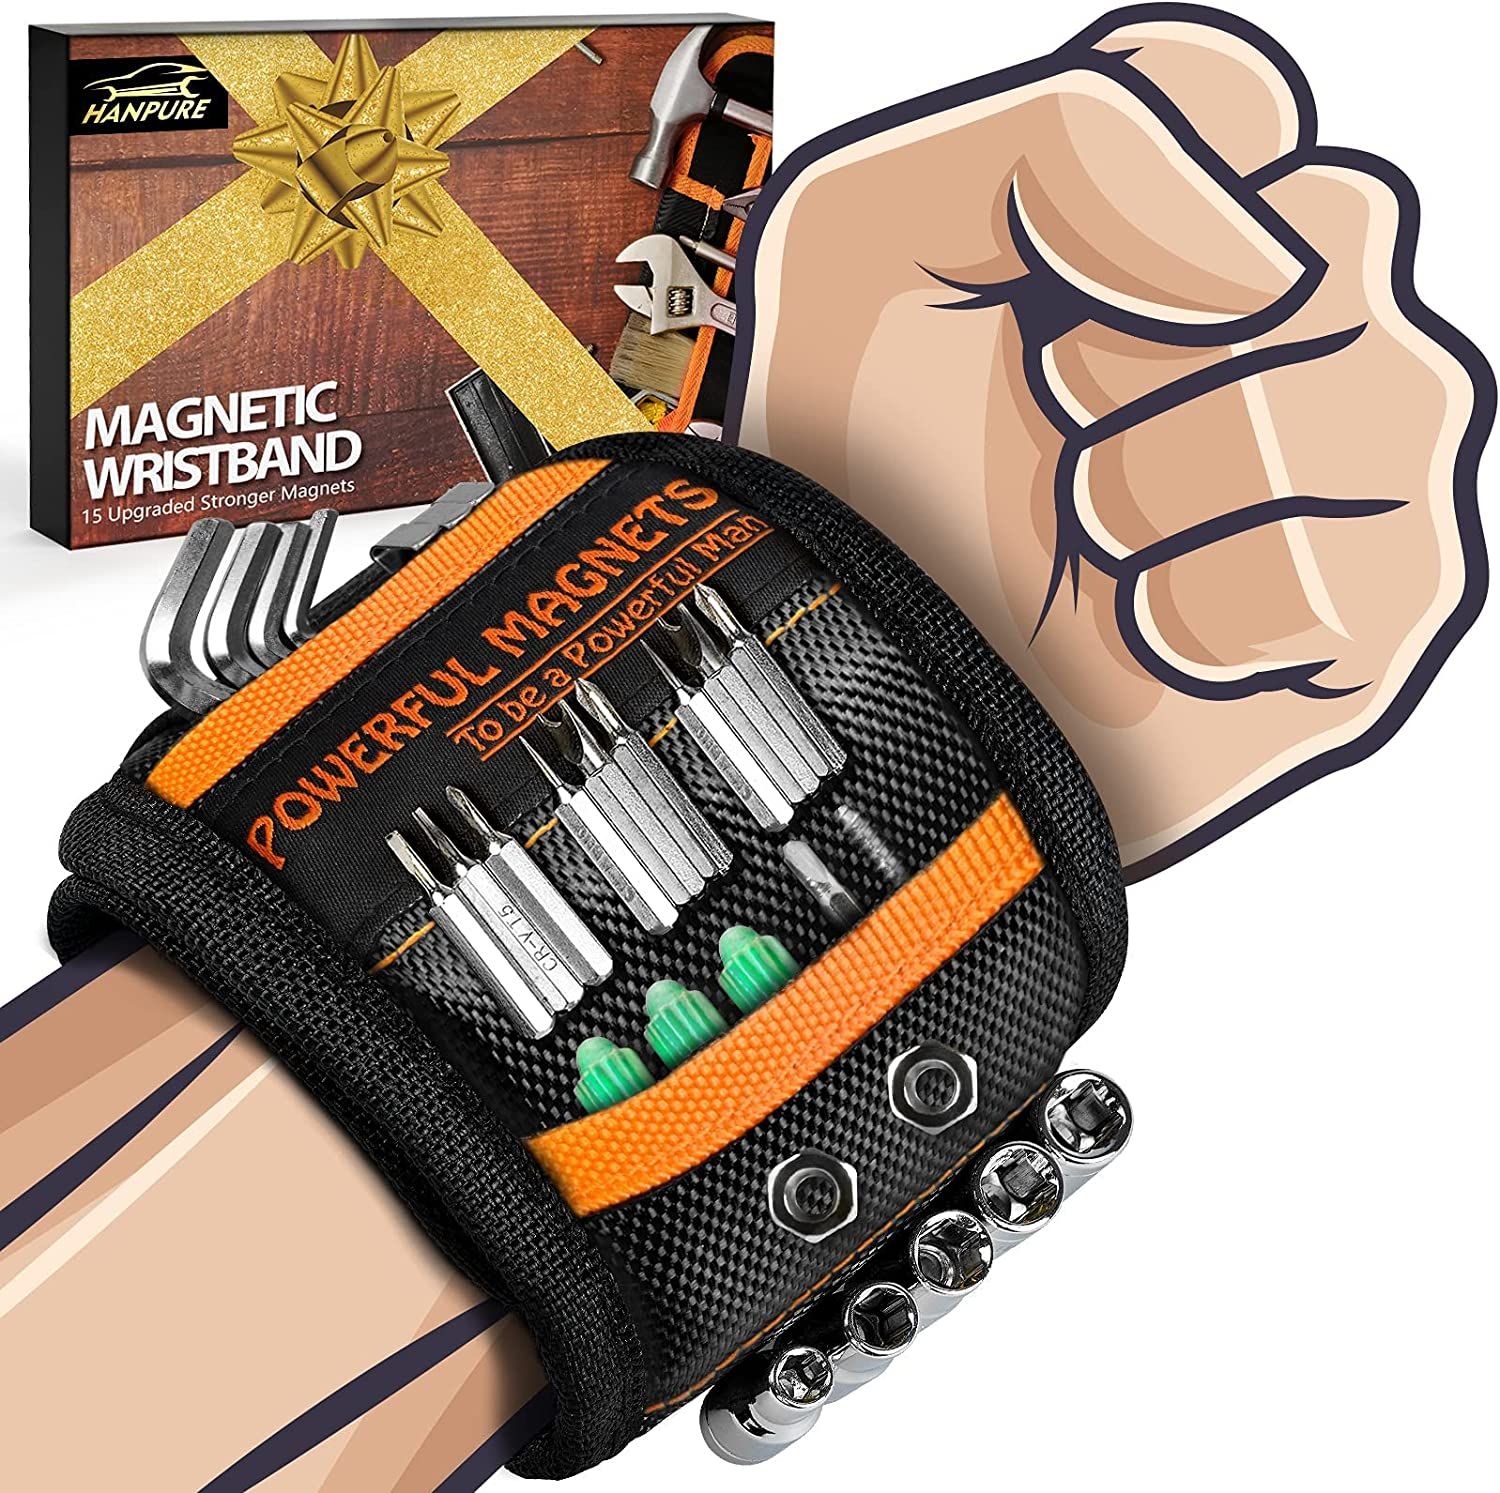 HANPURE Tool Gifts for Men Stocking Stuffers - Magnetic Wristband for Holding Screws, Wrist Magne... | Amazon (US)